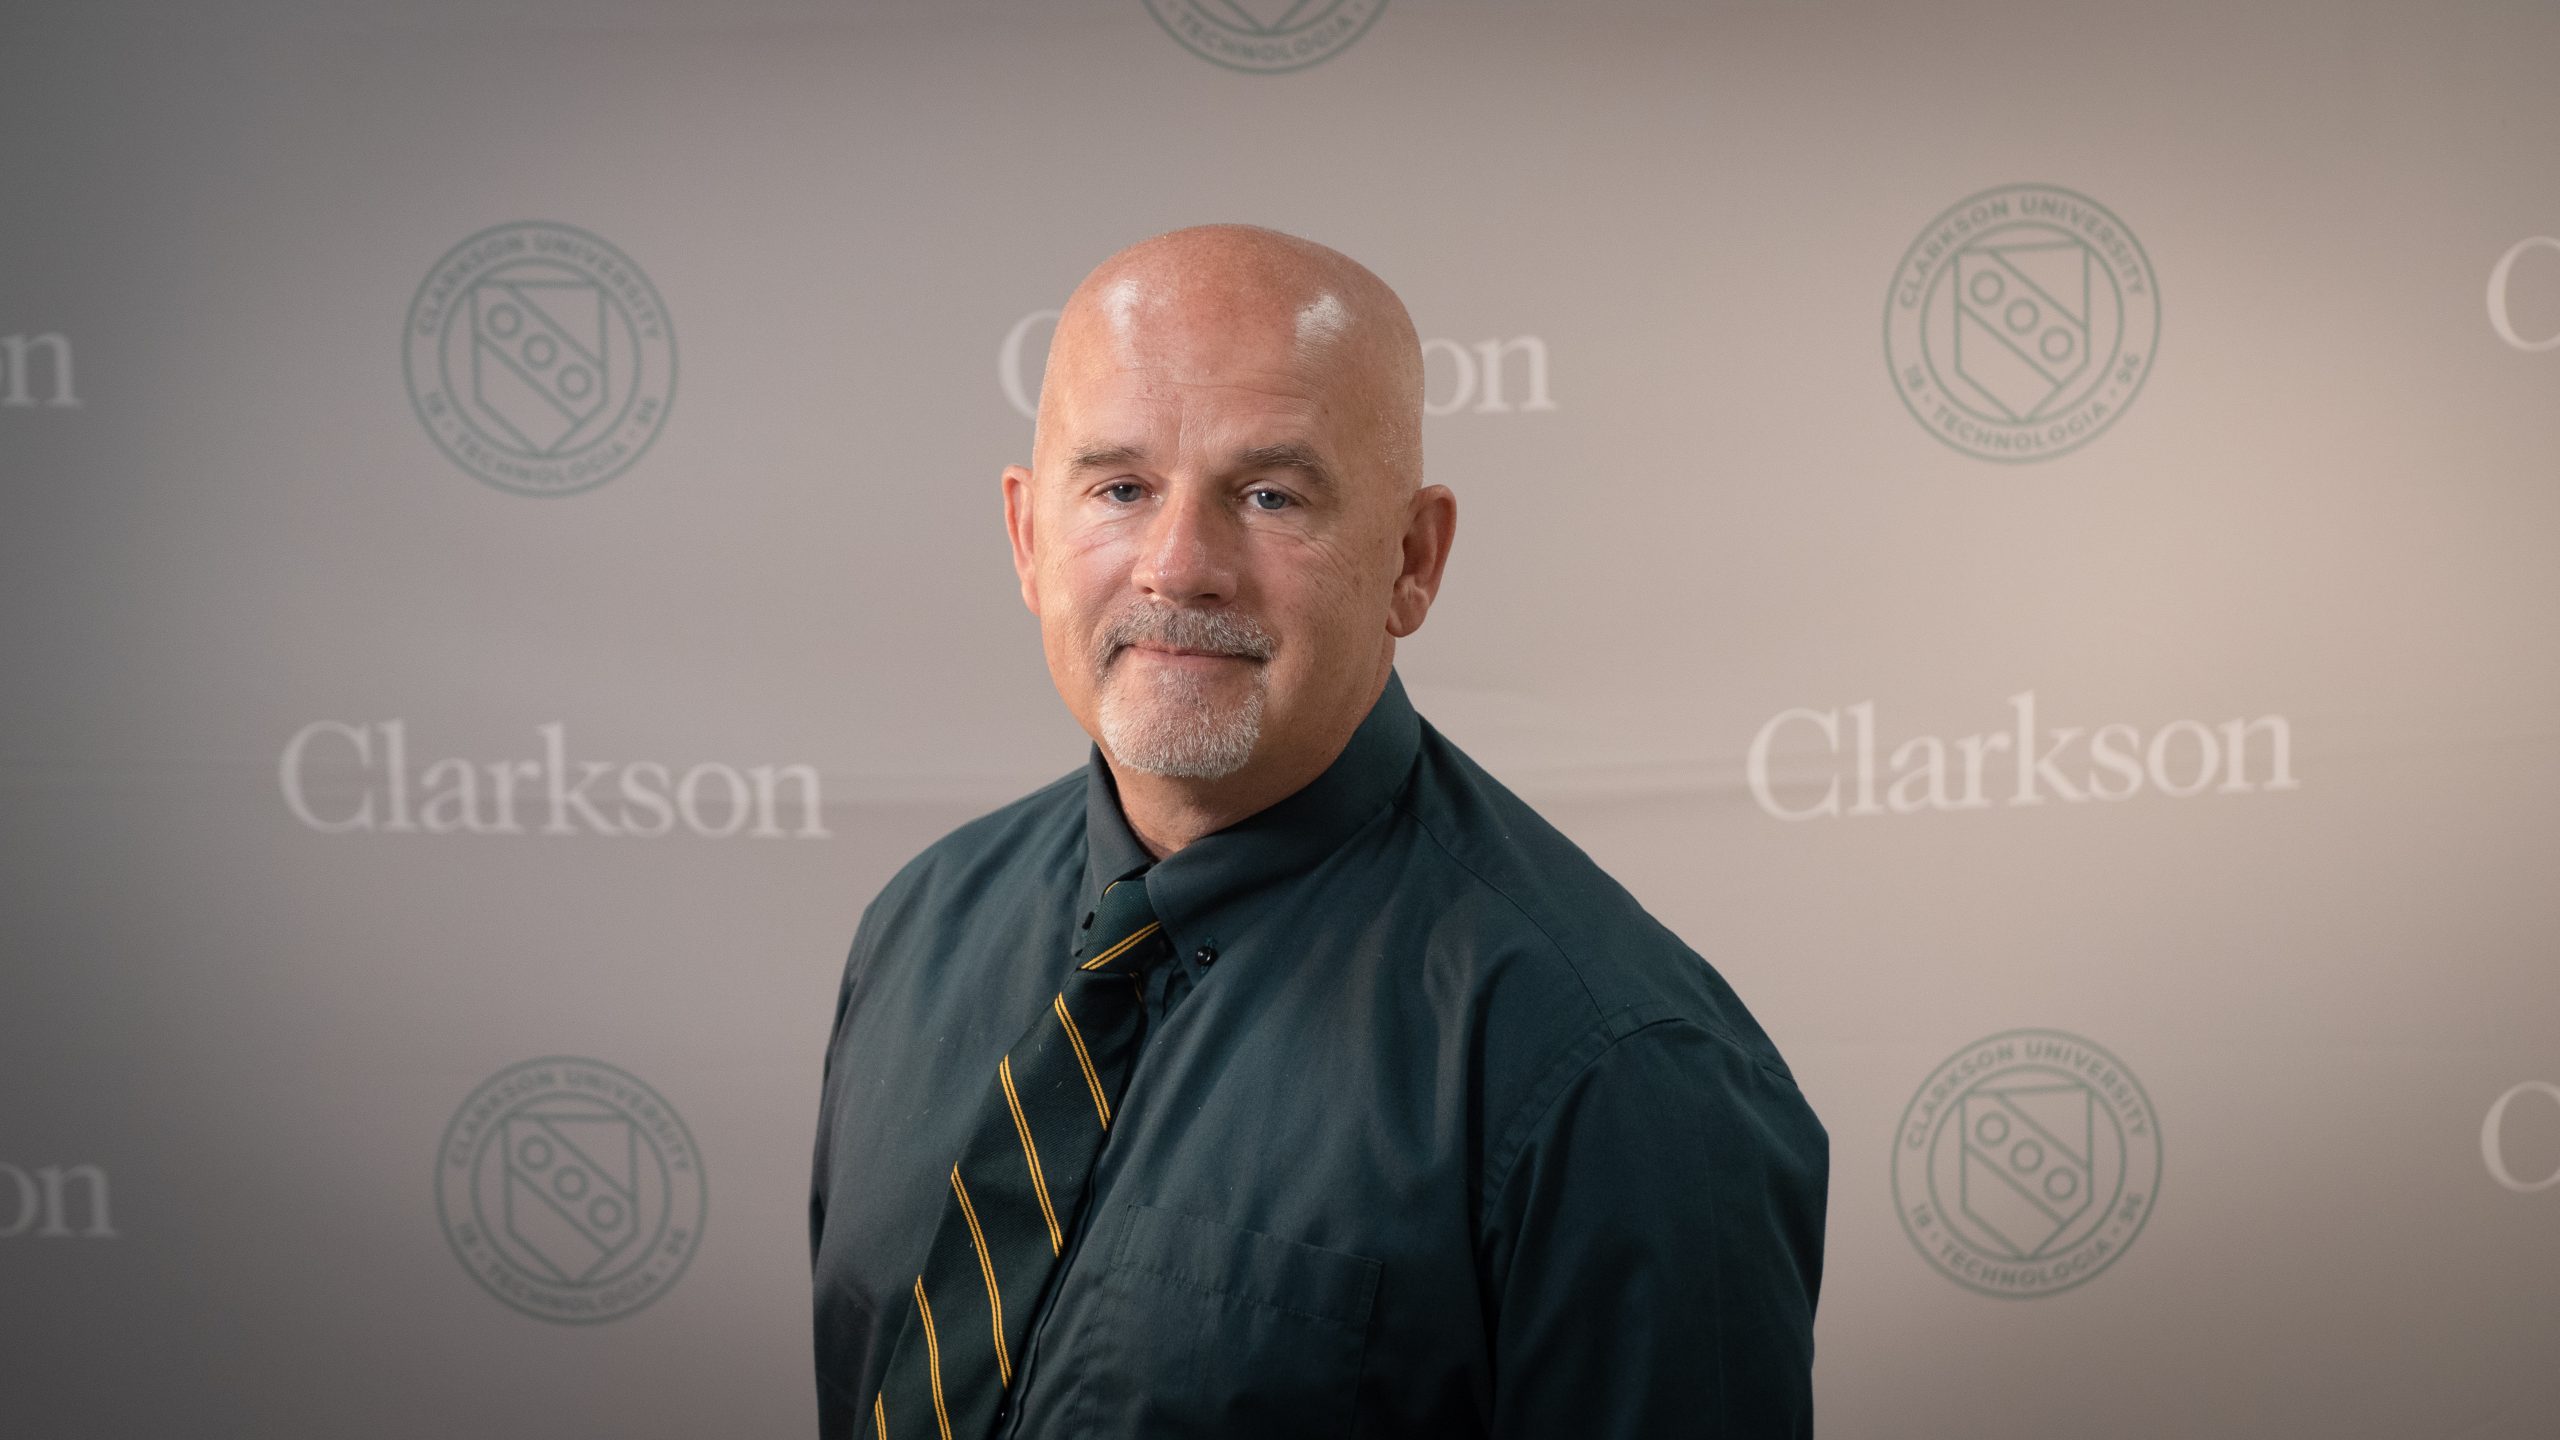 William MacKinnon Promoted to Associate Professor on the Teaching Track at Clarkson University